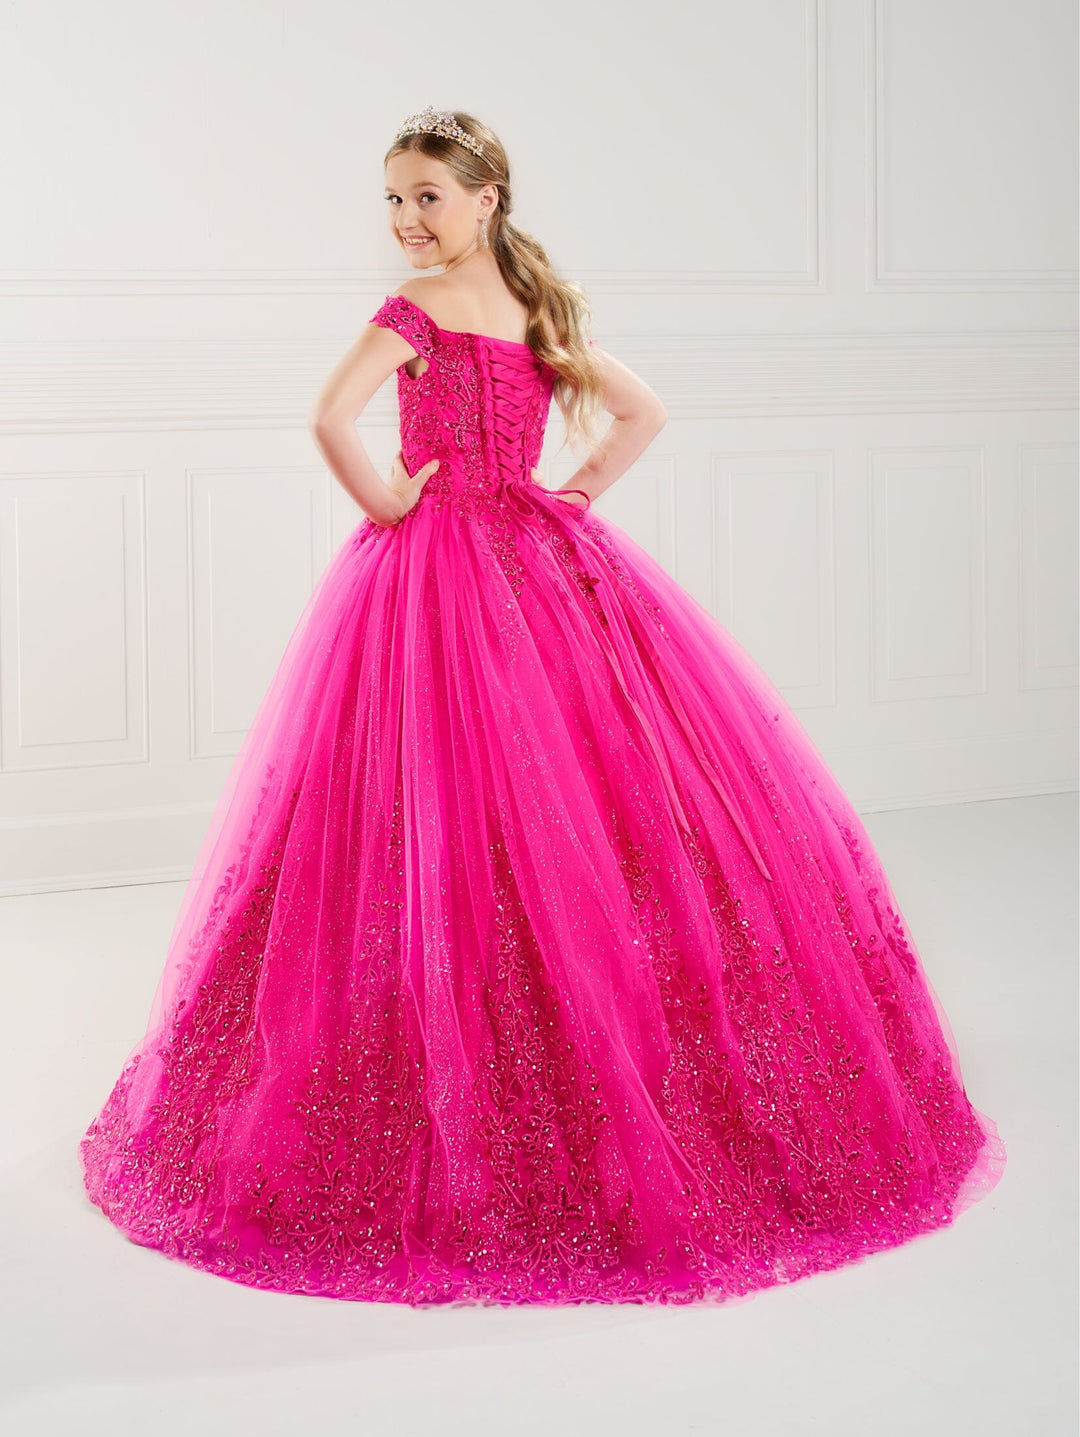 Girls Applique Off Shoulder Gown by Tiffany Princess 13748